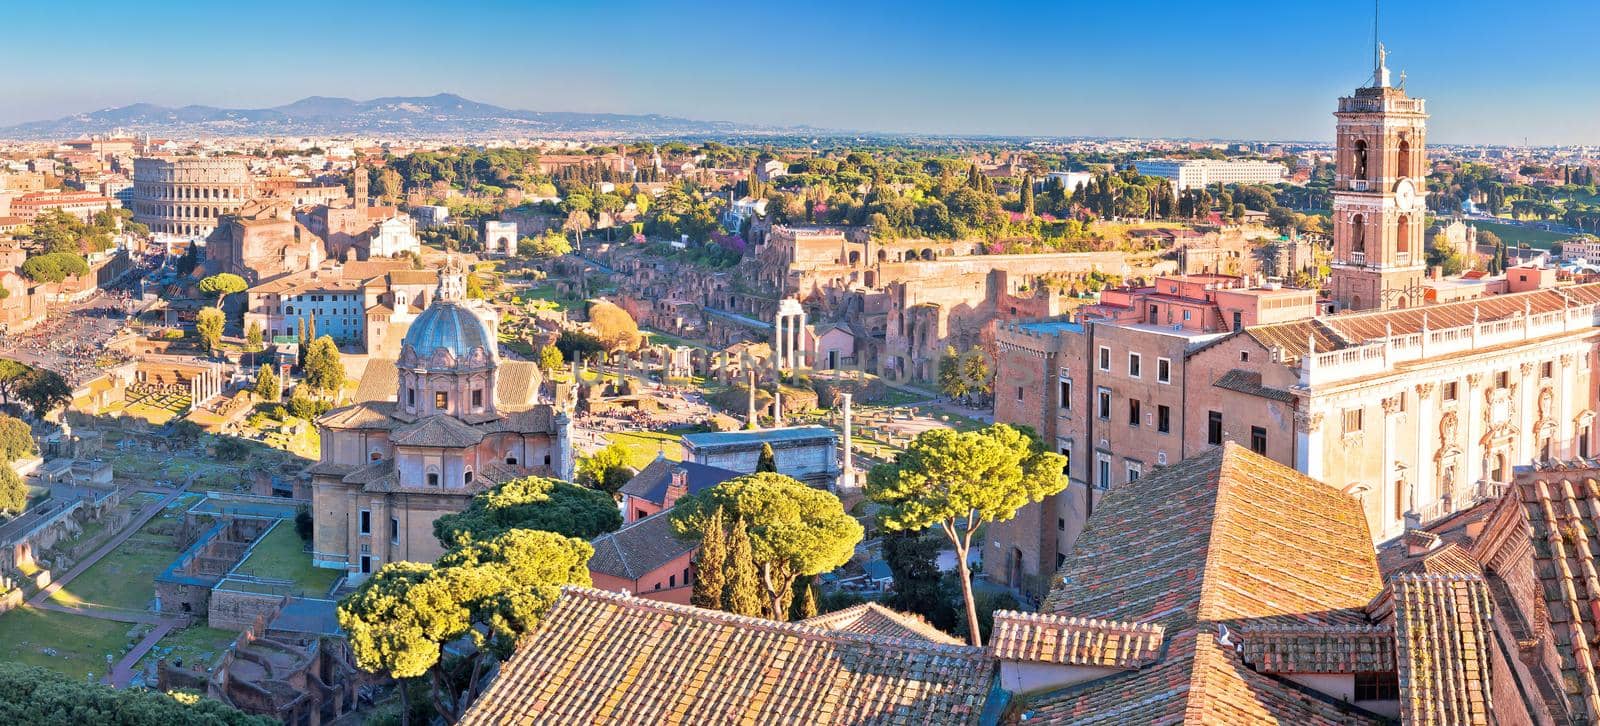 Eternal city of Rome historic landmarks panoramic view by xbrchx